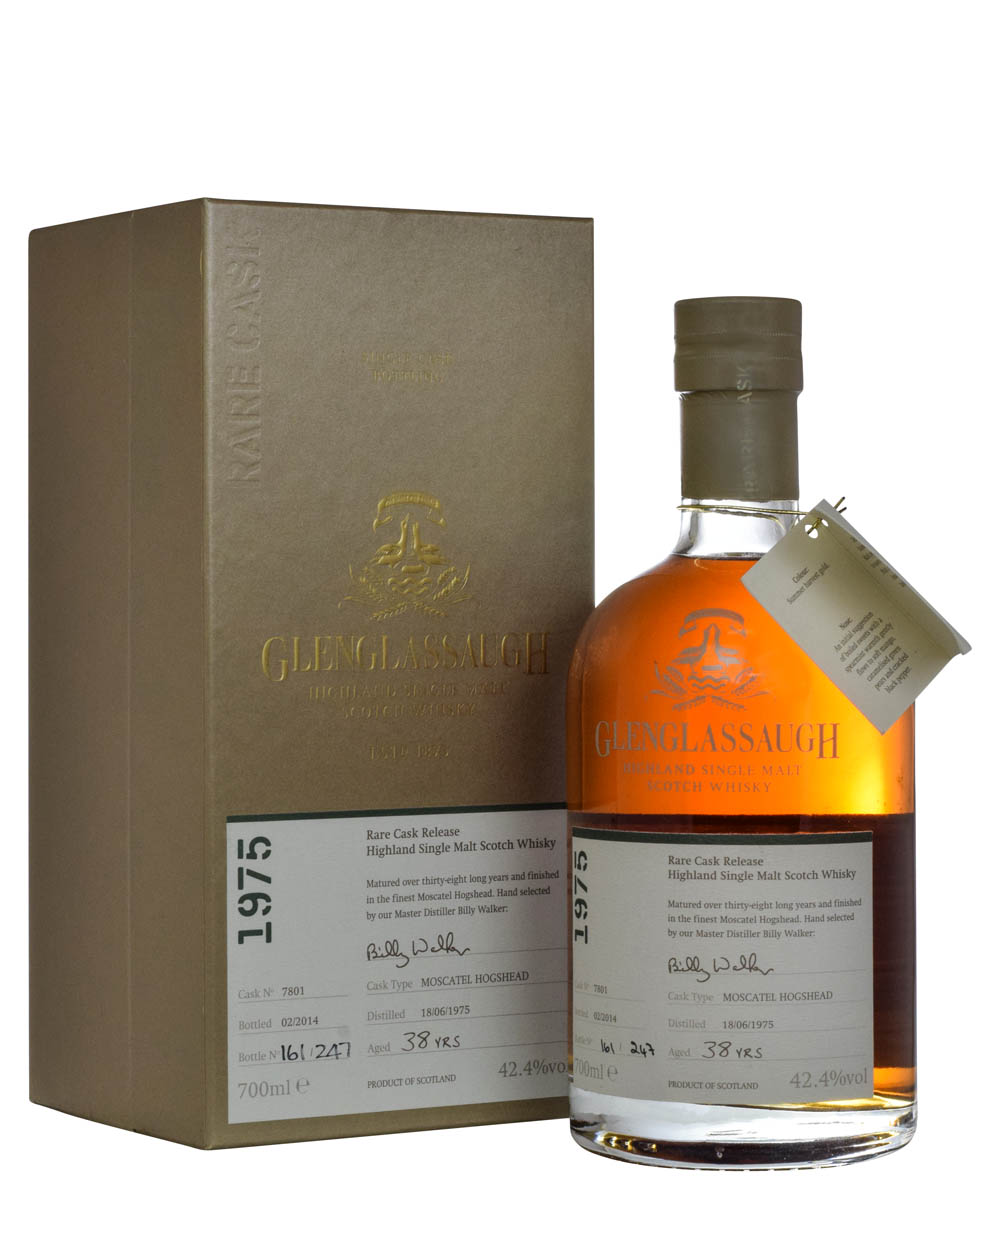 Glenglassaugh 38 Years Old 1975 Moscatel Hogshead Box Musthave Malts MHM